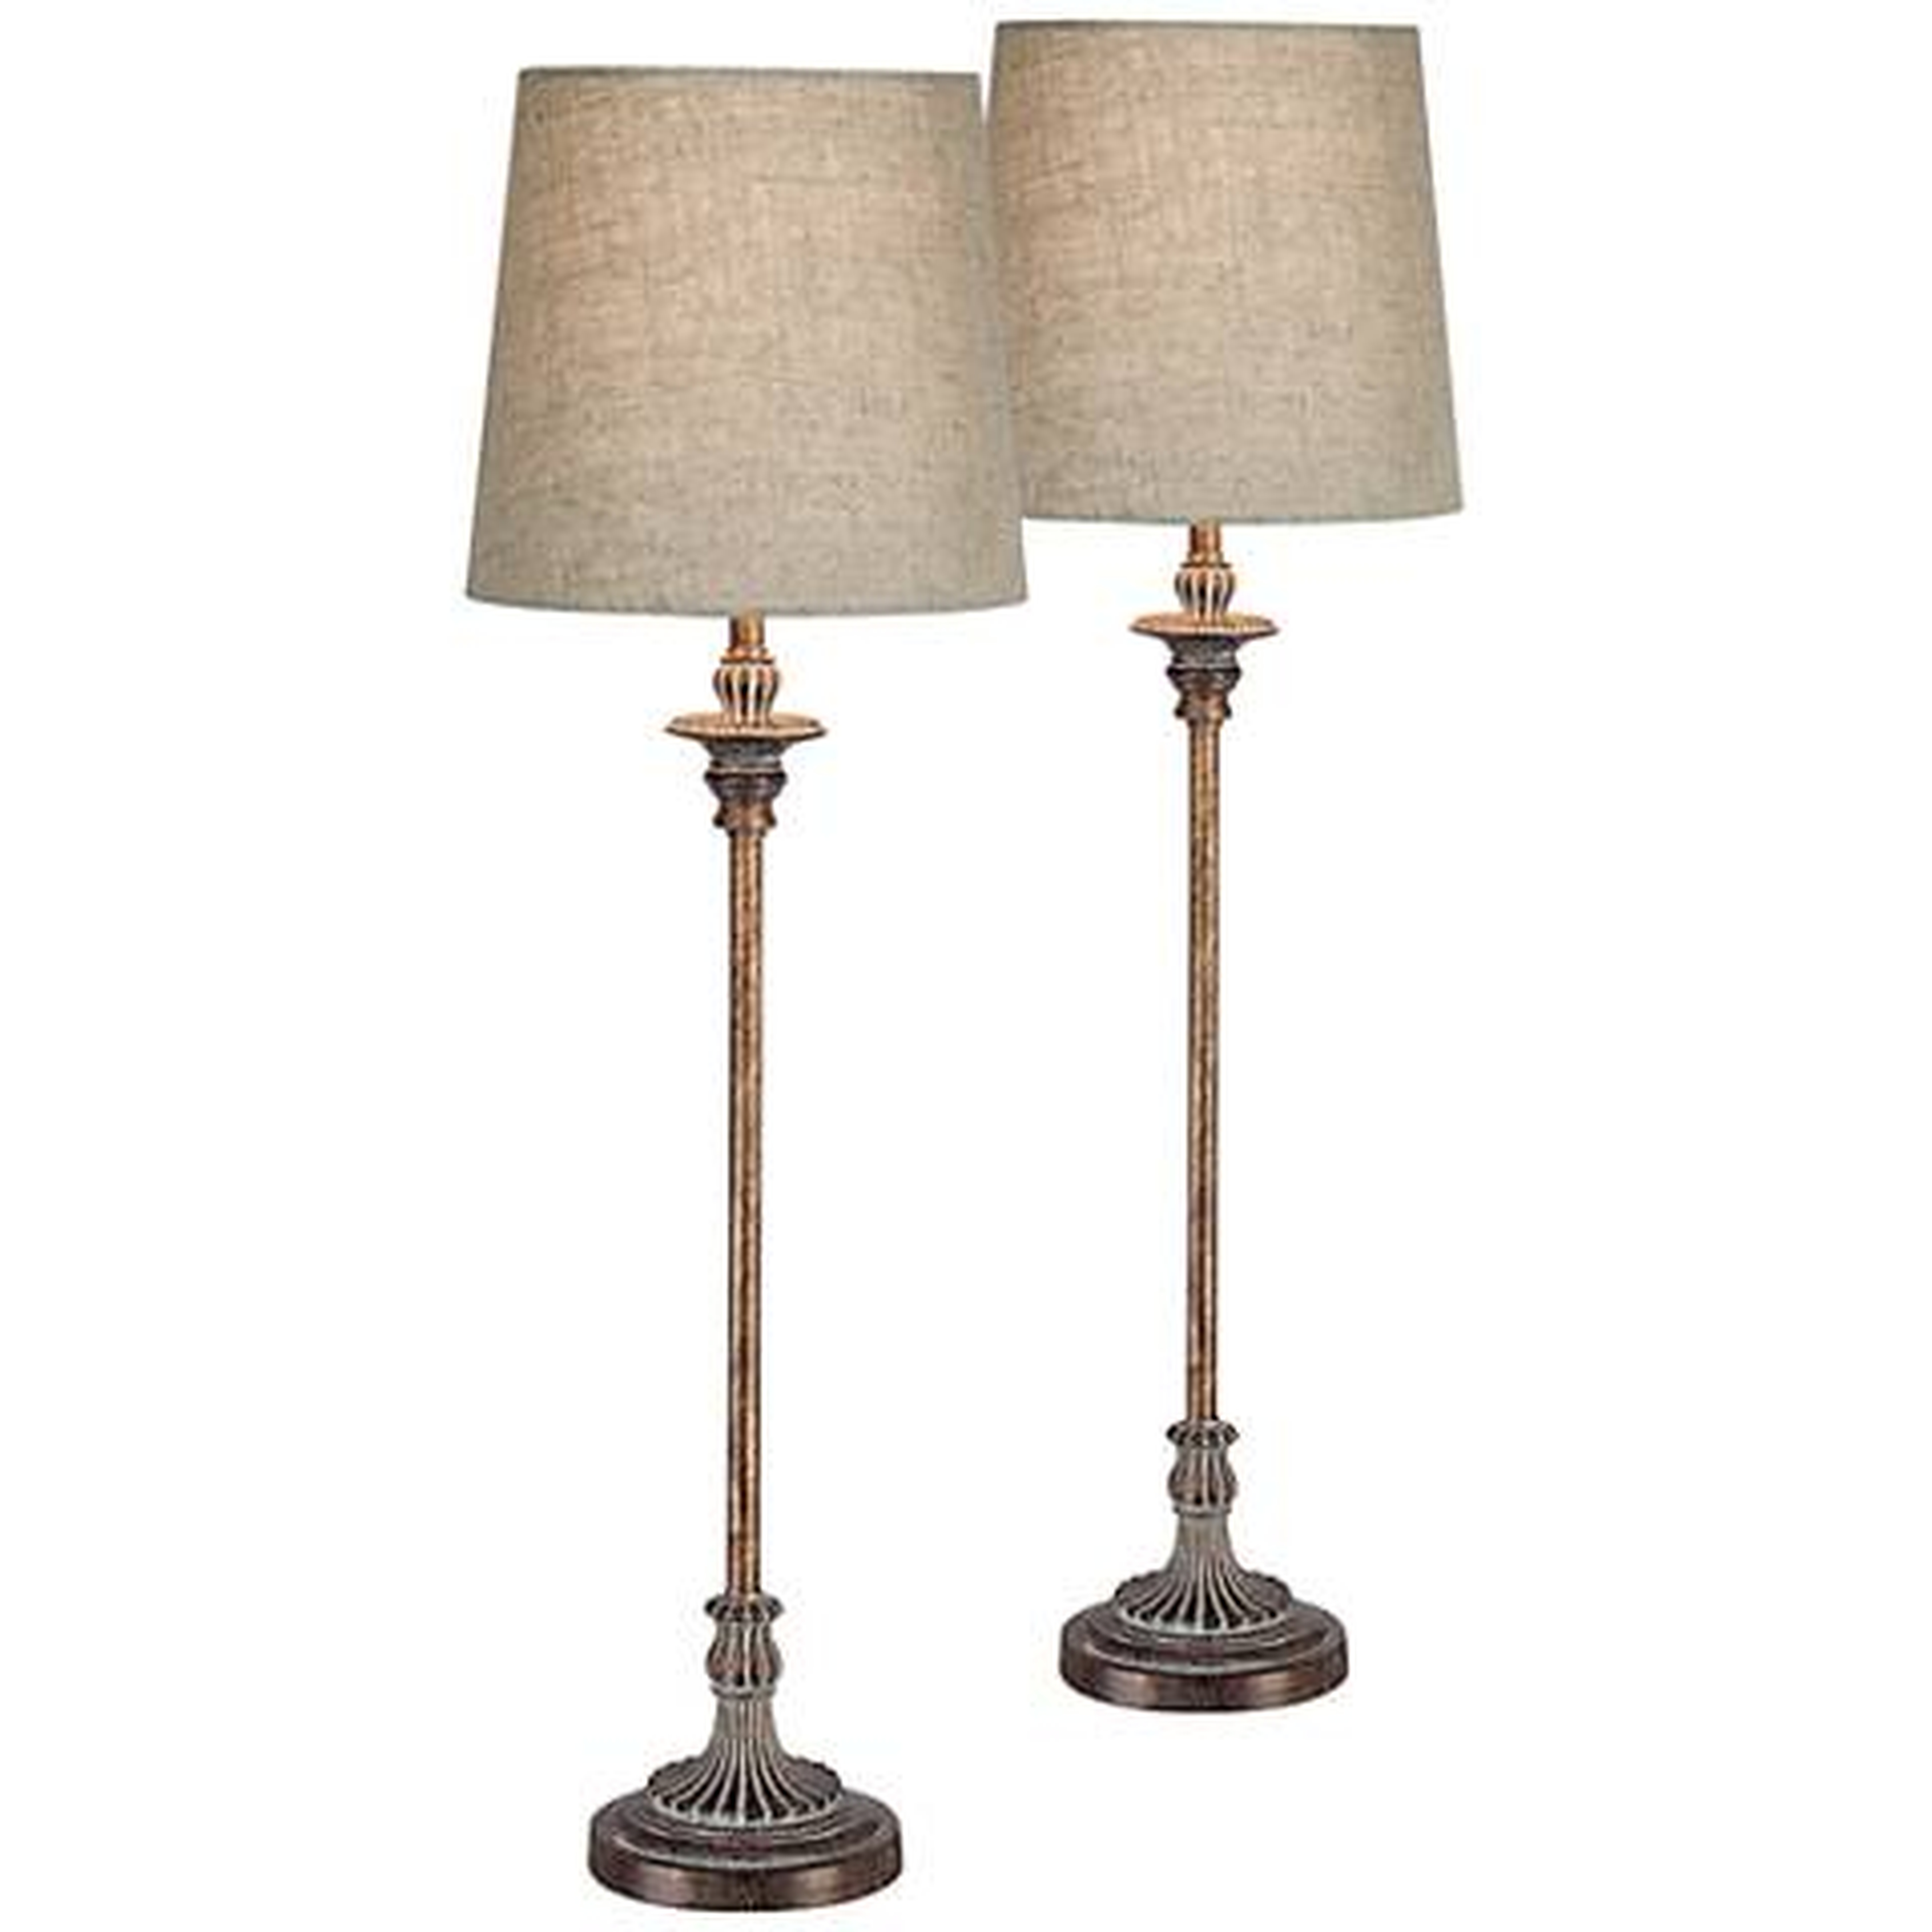 Bentley Weathered Brown Buffet Table Lamp Set of 2 - Lamps Plus